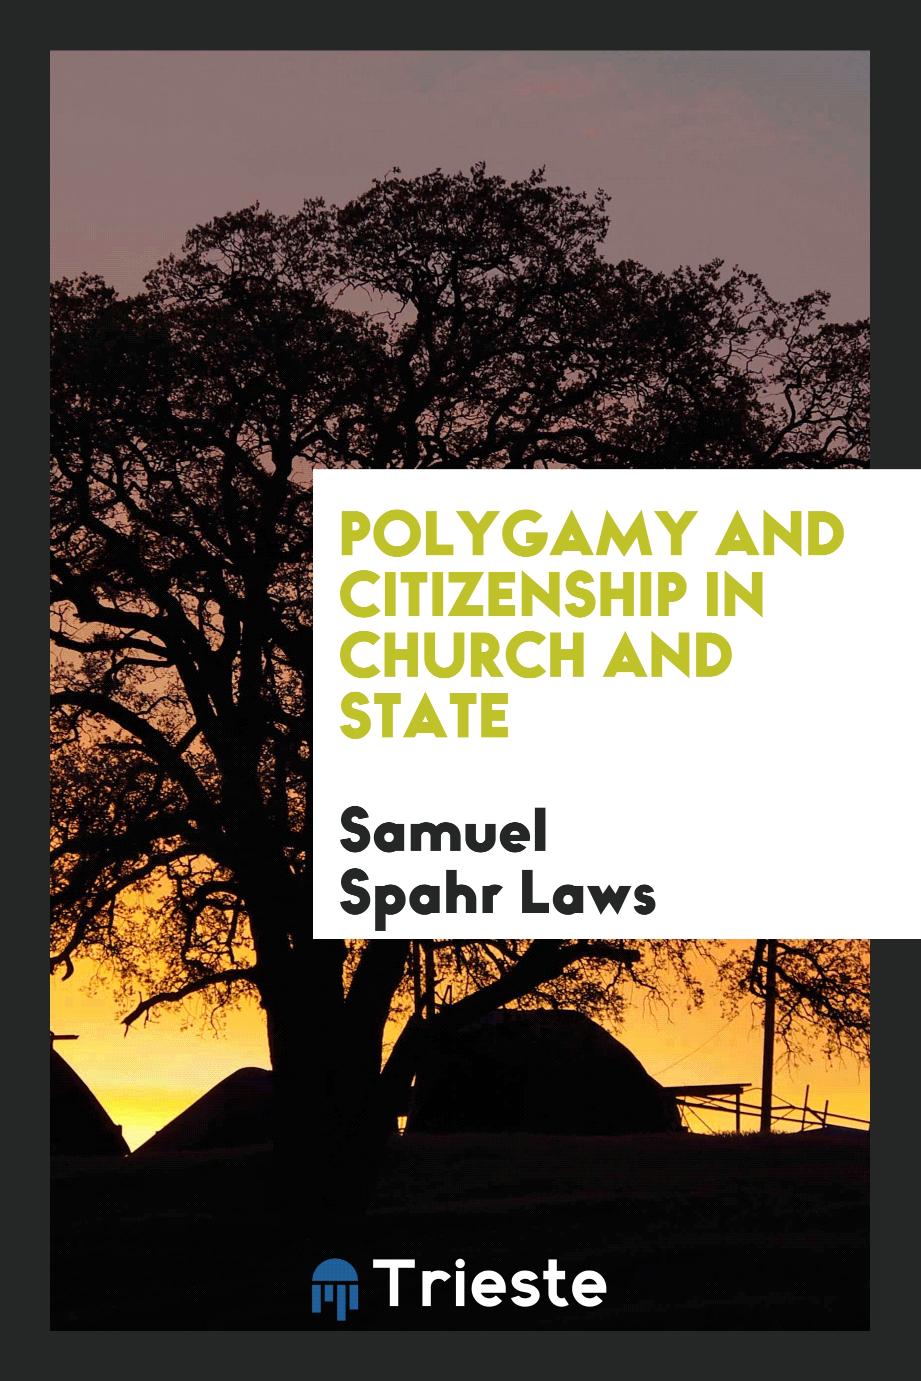 Polygamy and citizenship in church and state